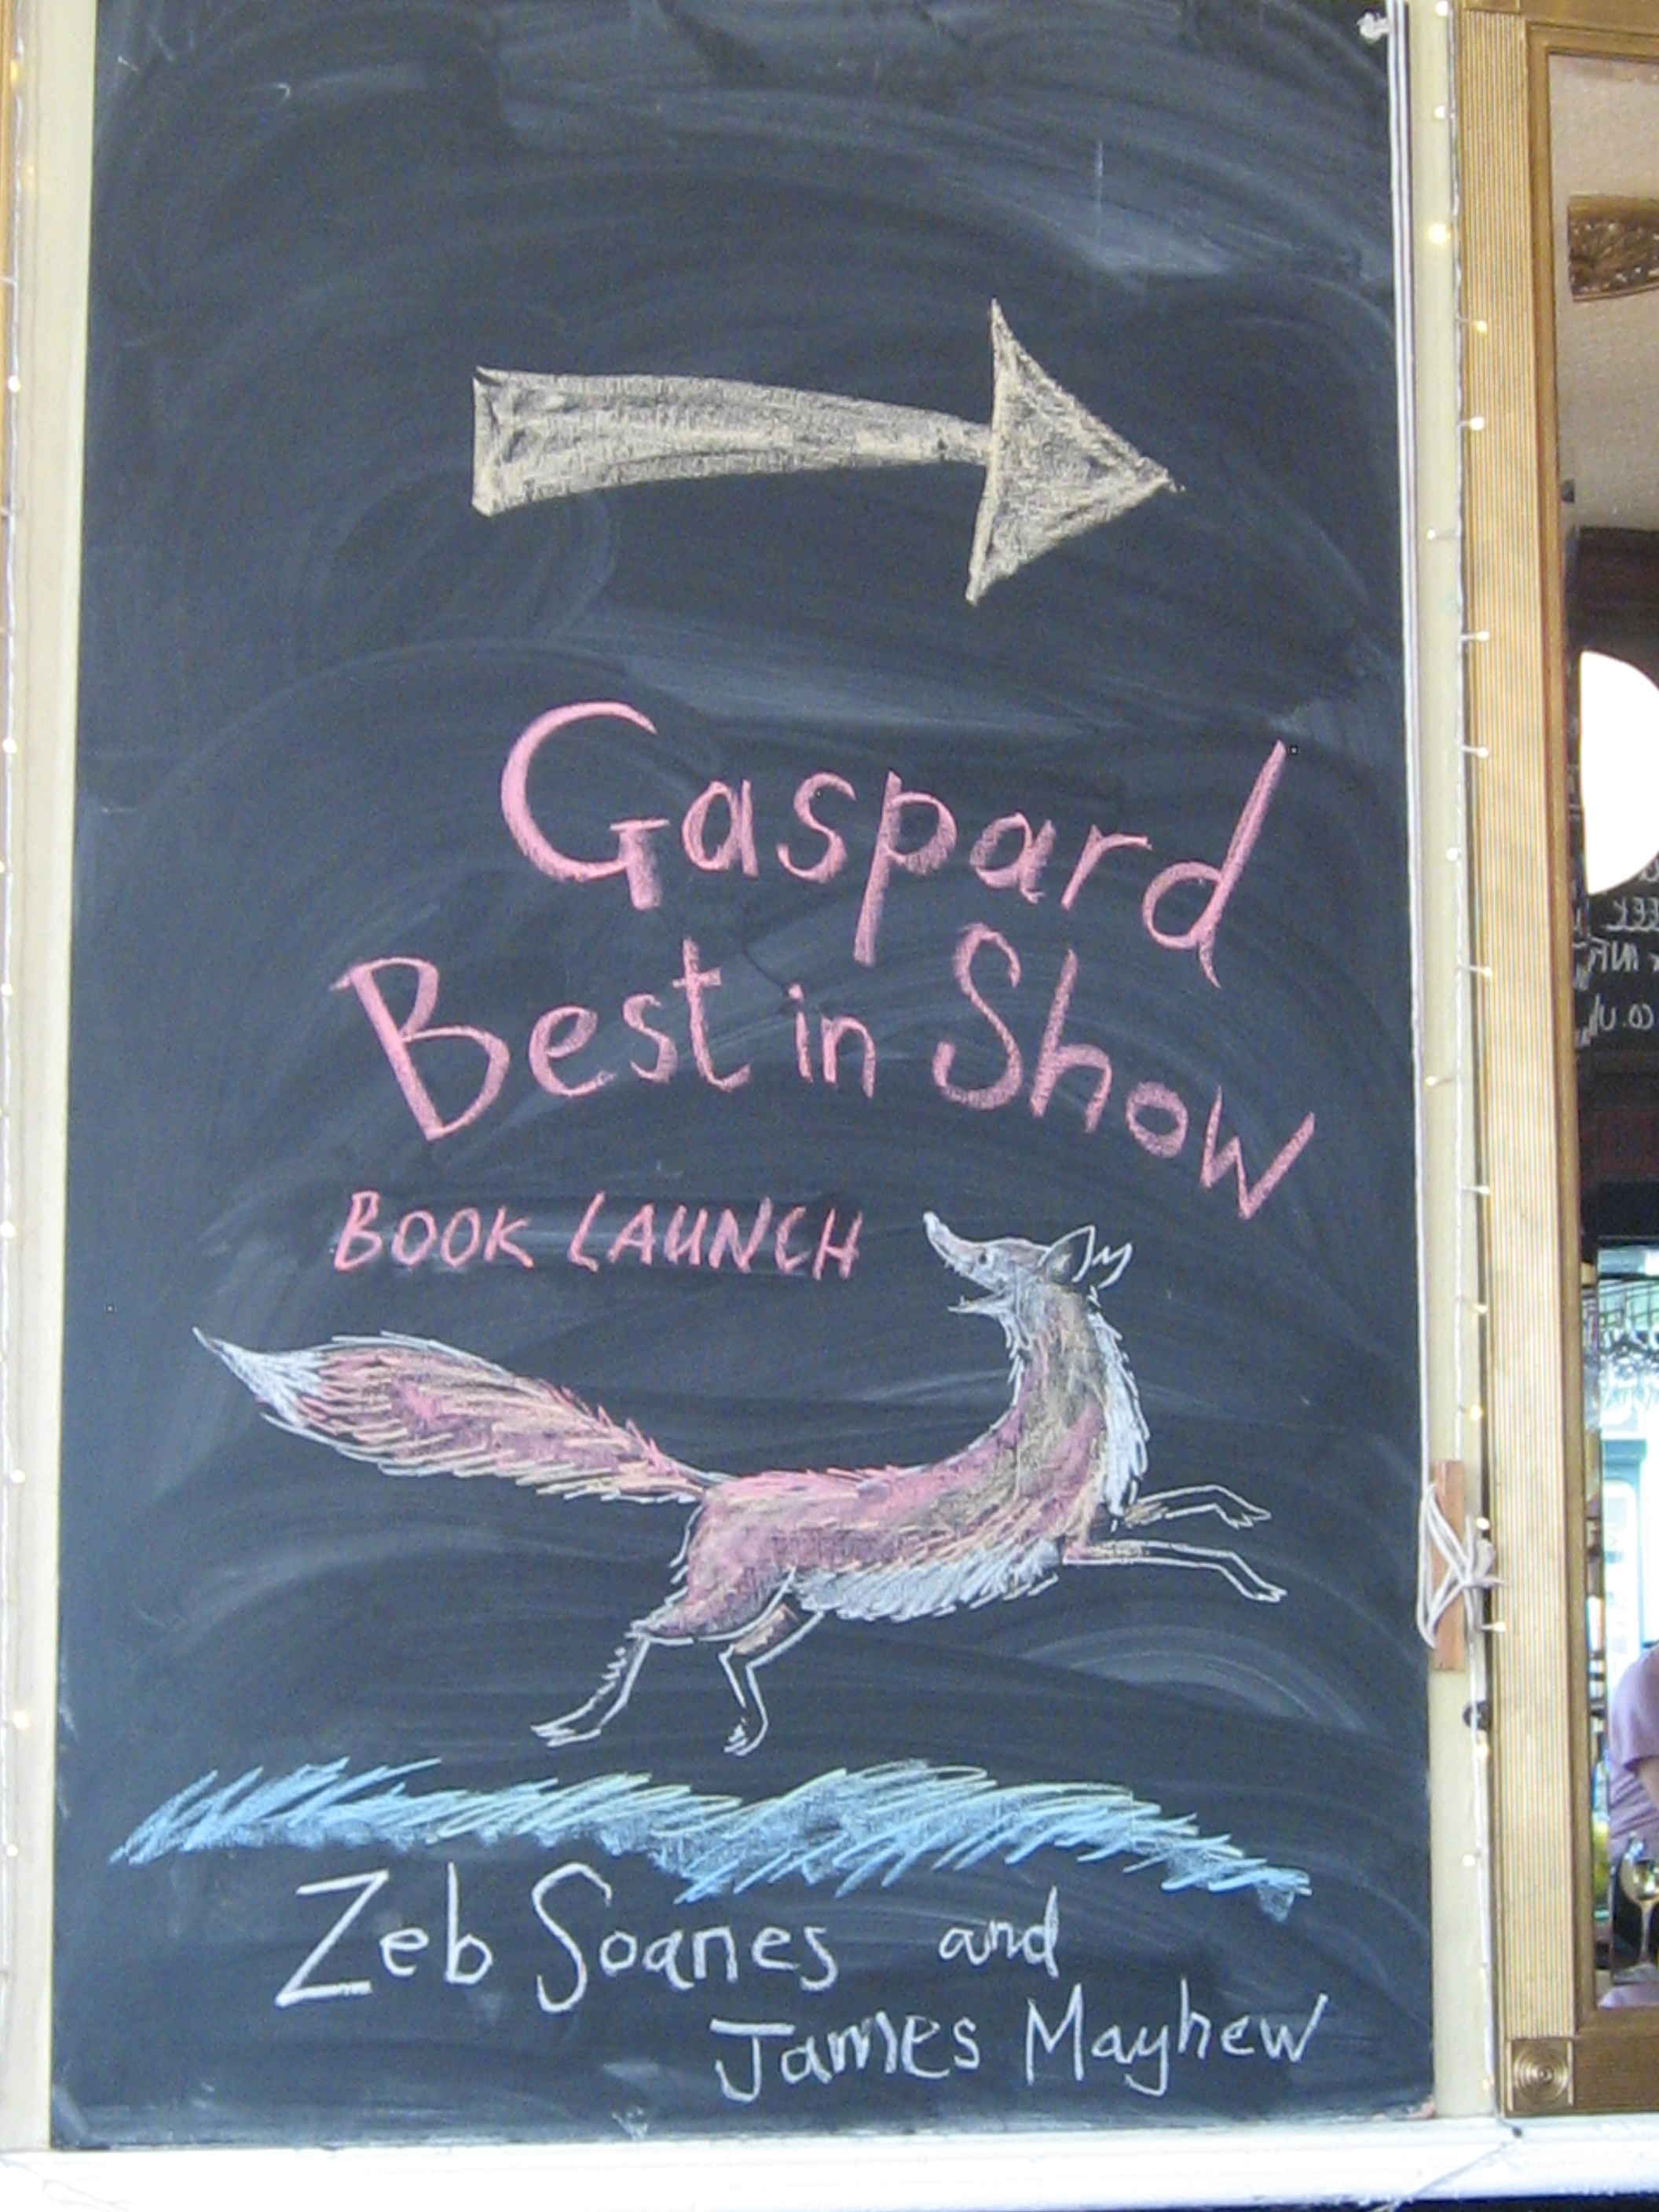 London Launch of Gaspard Best in Show